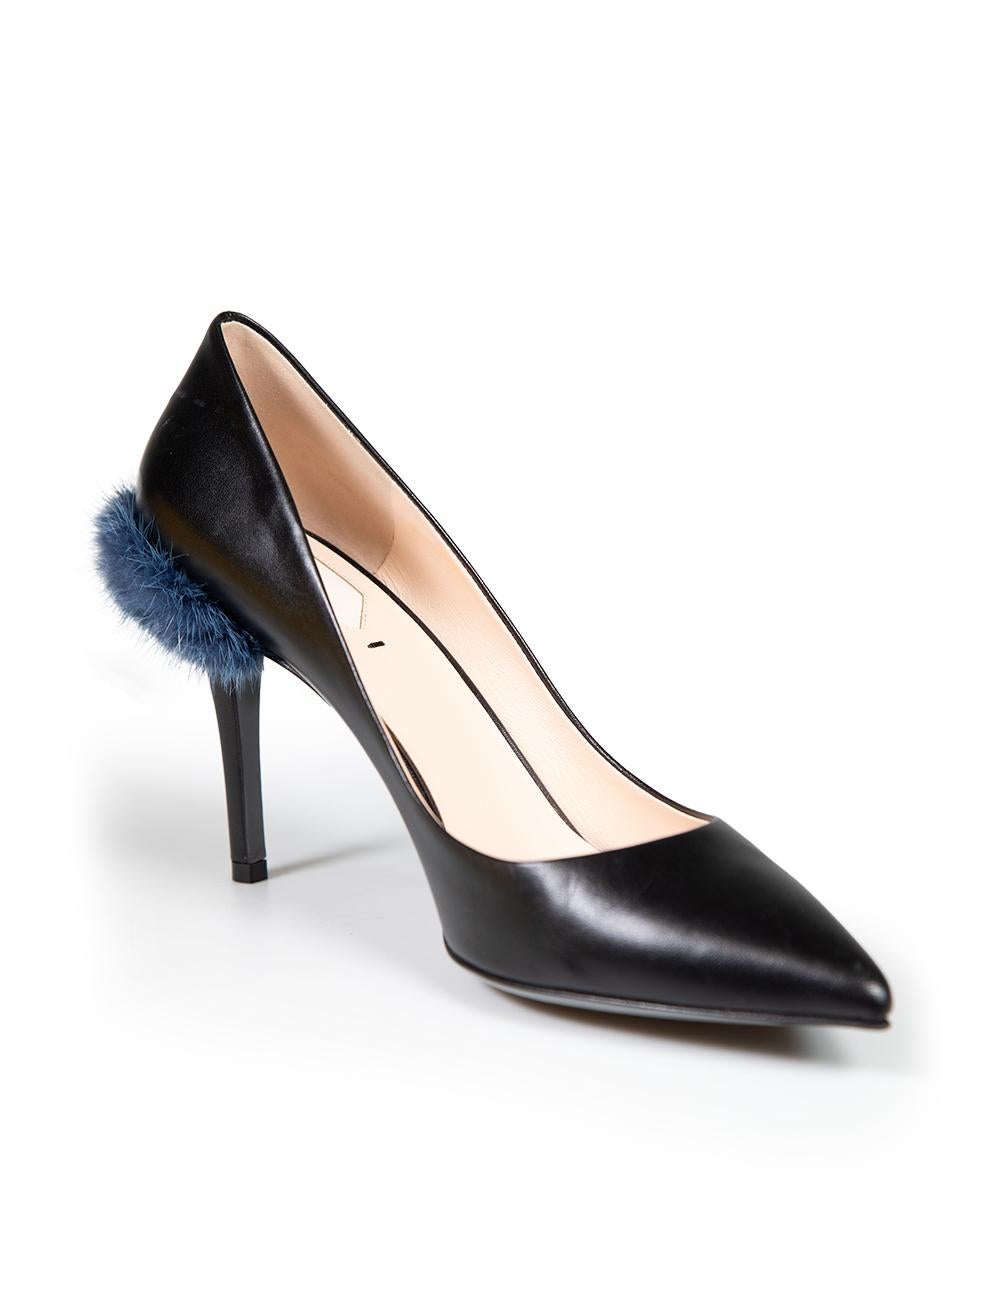 CONDITION is Very good. Minimal wear to heels is evident. Minimal scratches to the front and back of both shoes. Abrasion to the tip of the right shoe and scratches to the right heel on this used Fendi designer resale item. This item comes with